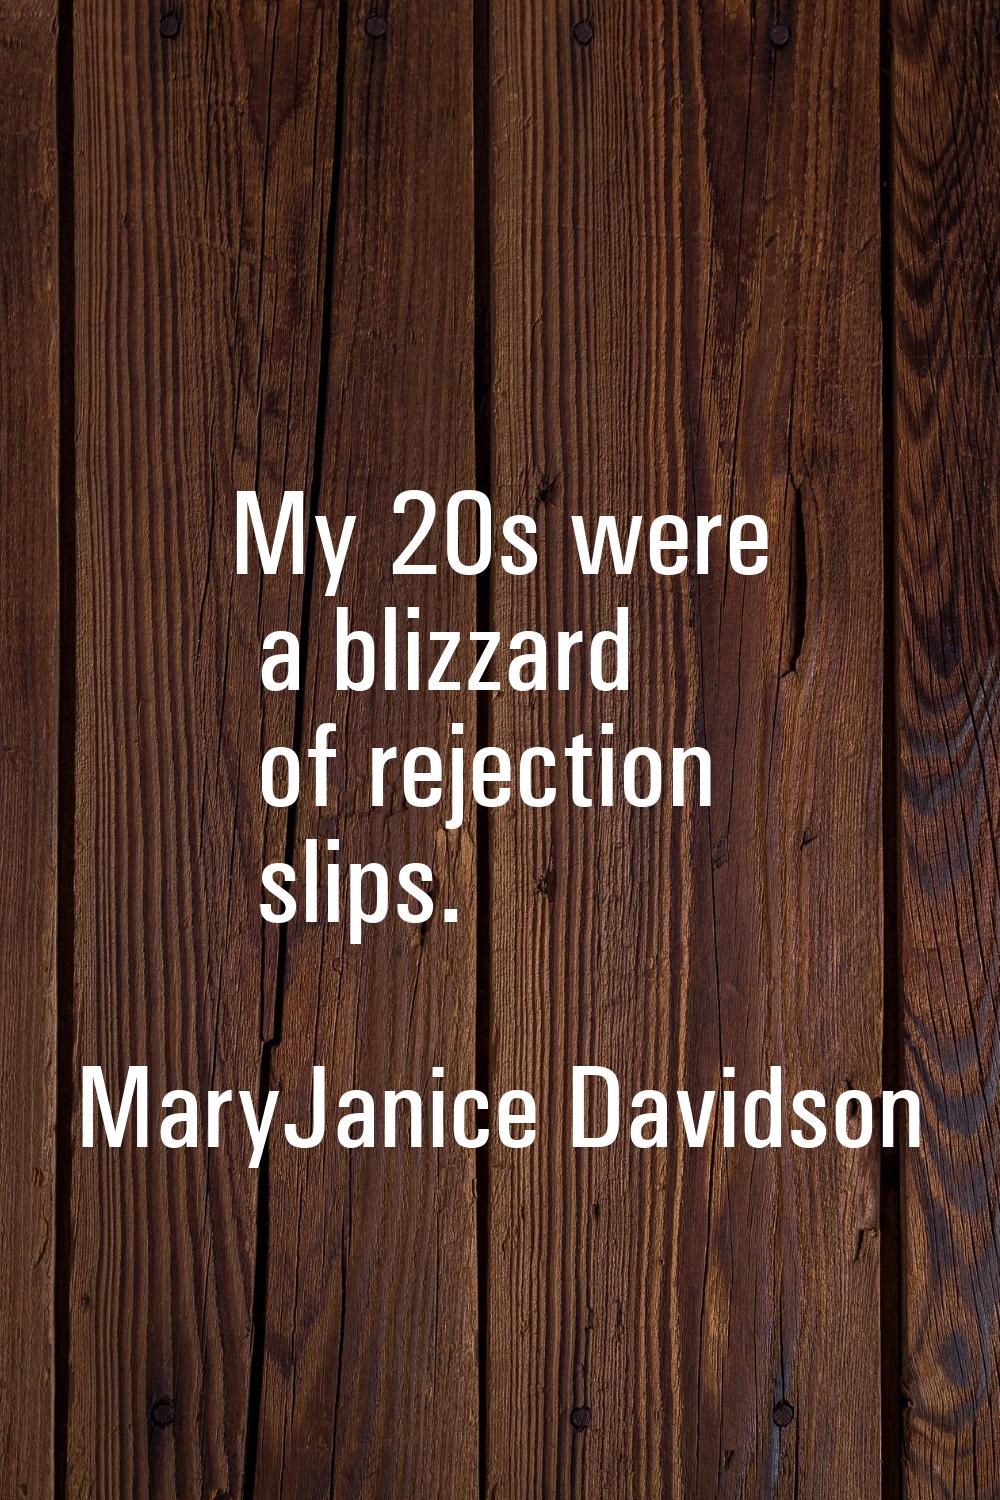 My 20s were a blizzard of rejection slips.